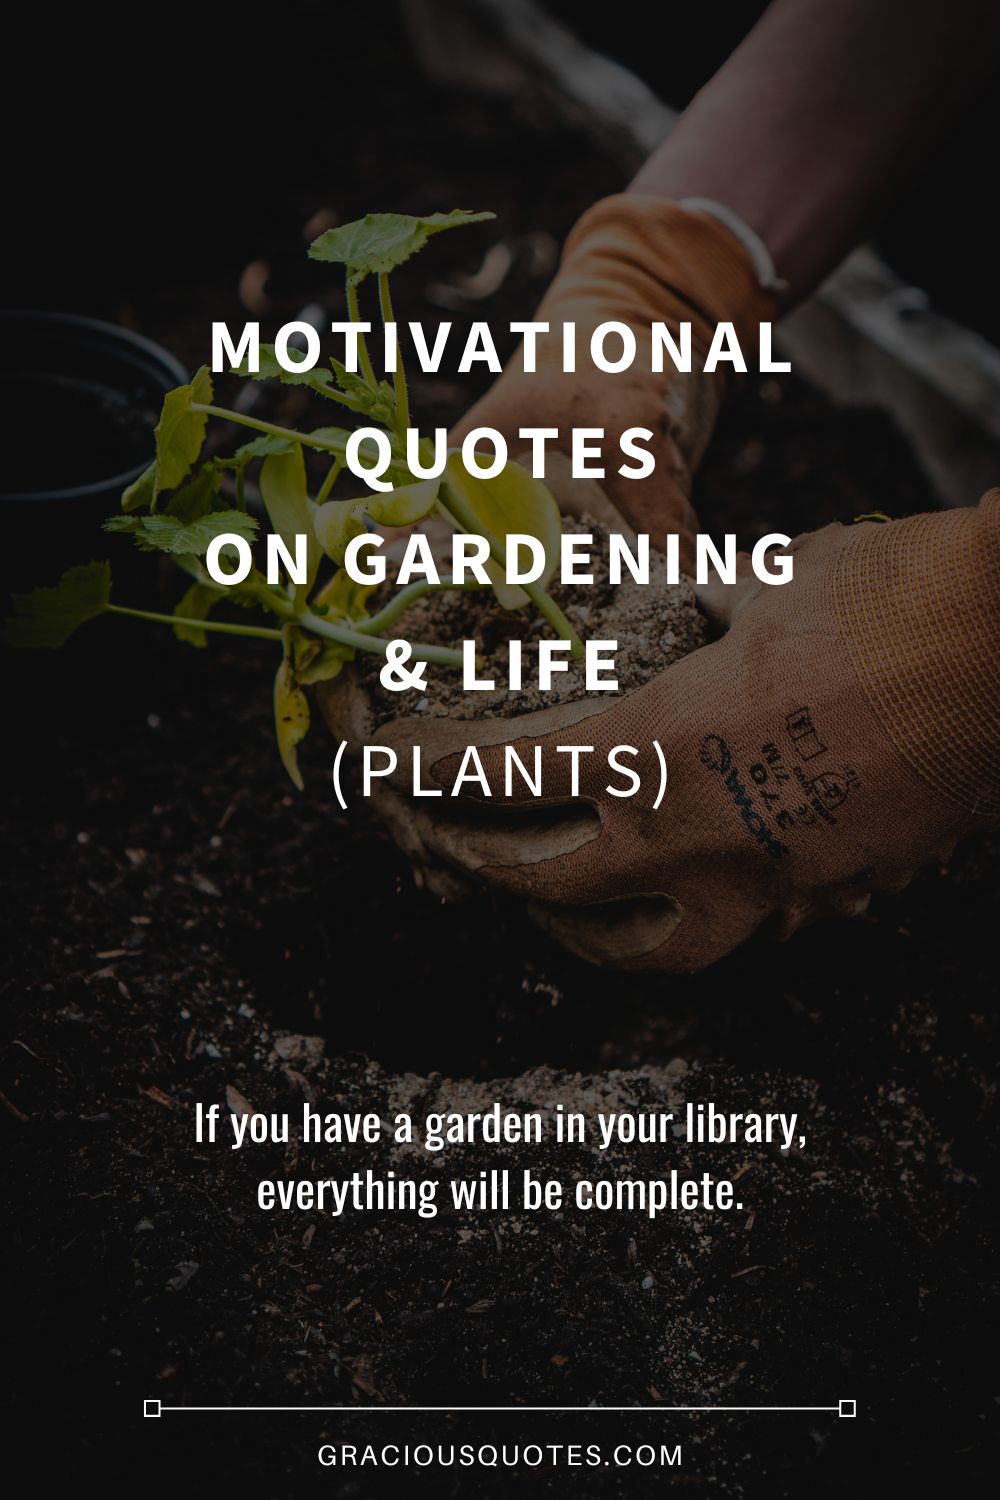 Motivational Quotes on Gardening & Life (PLANTS) - Gracious Quotes